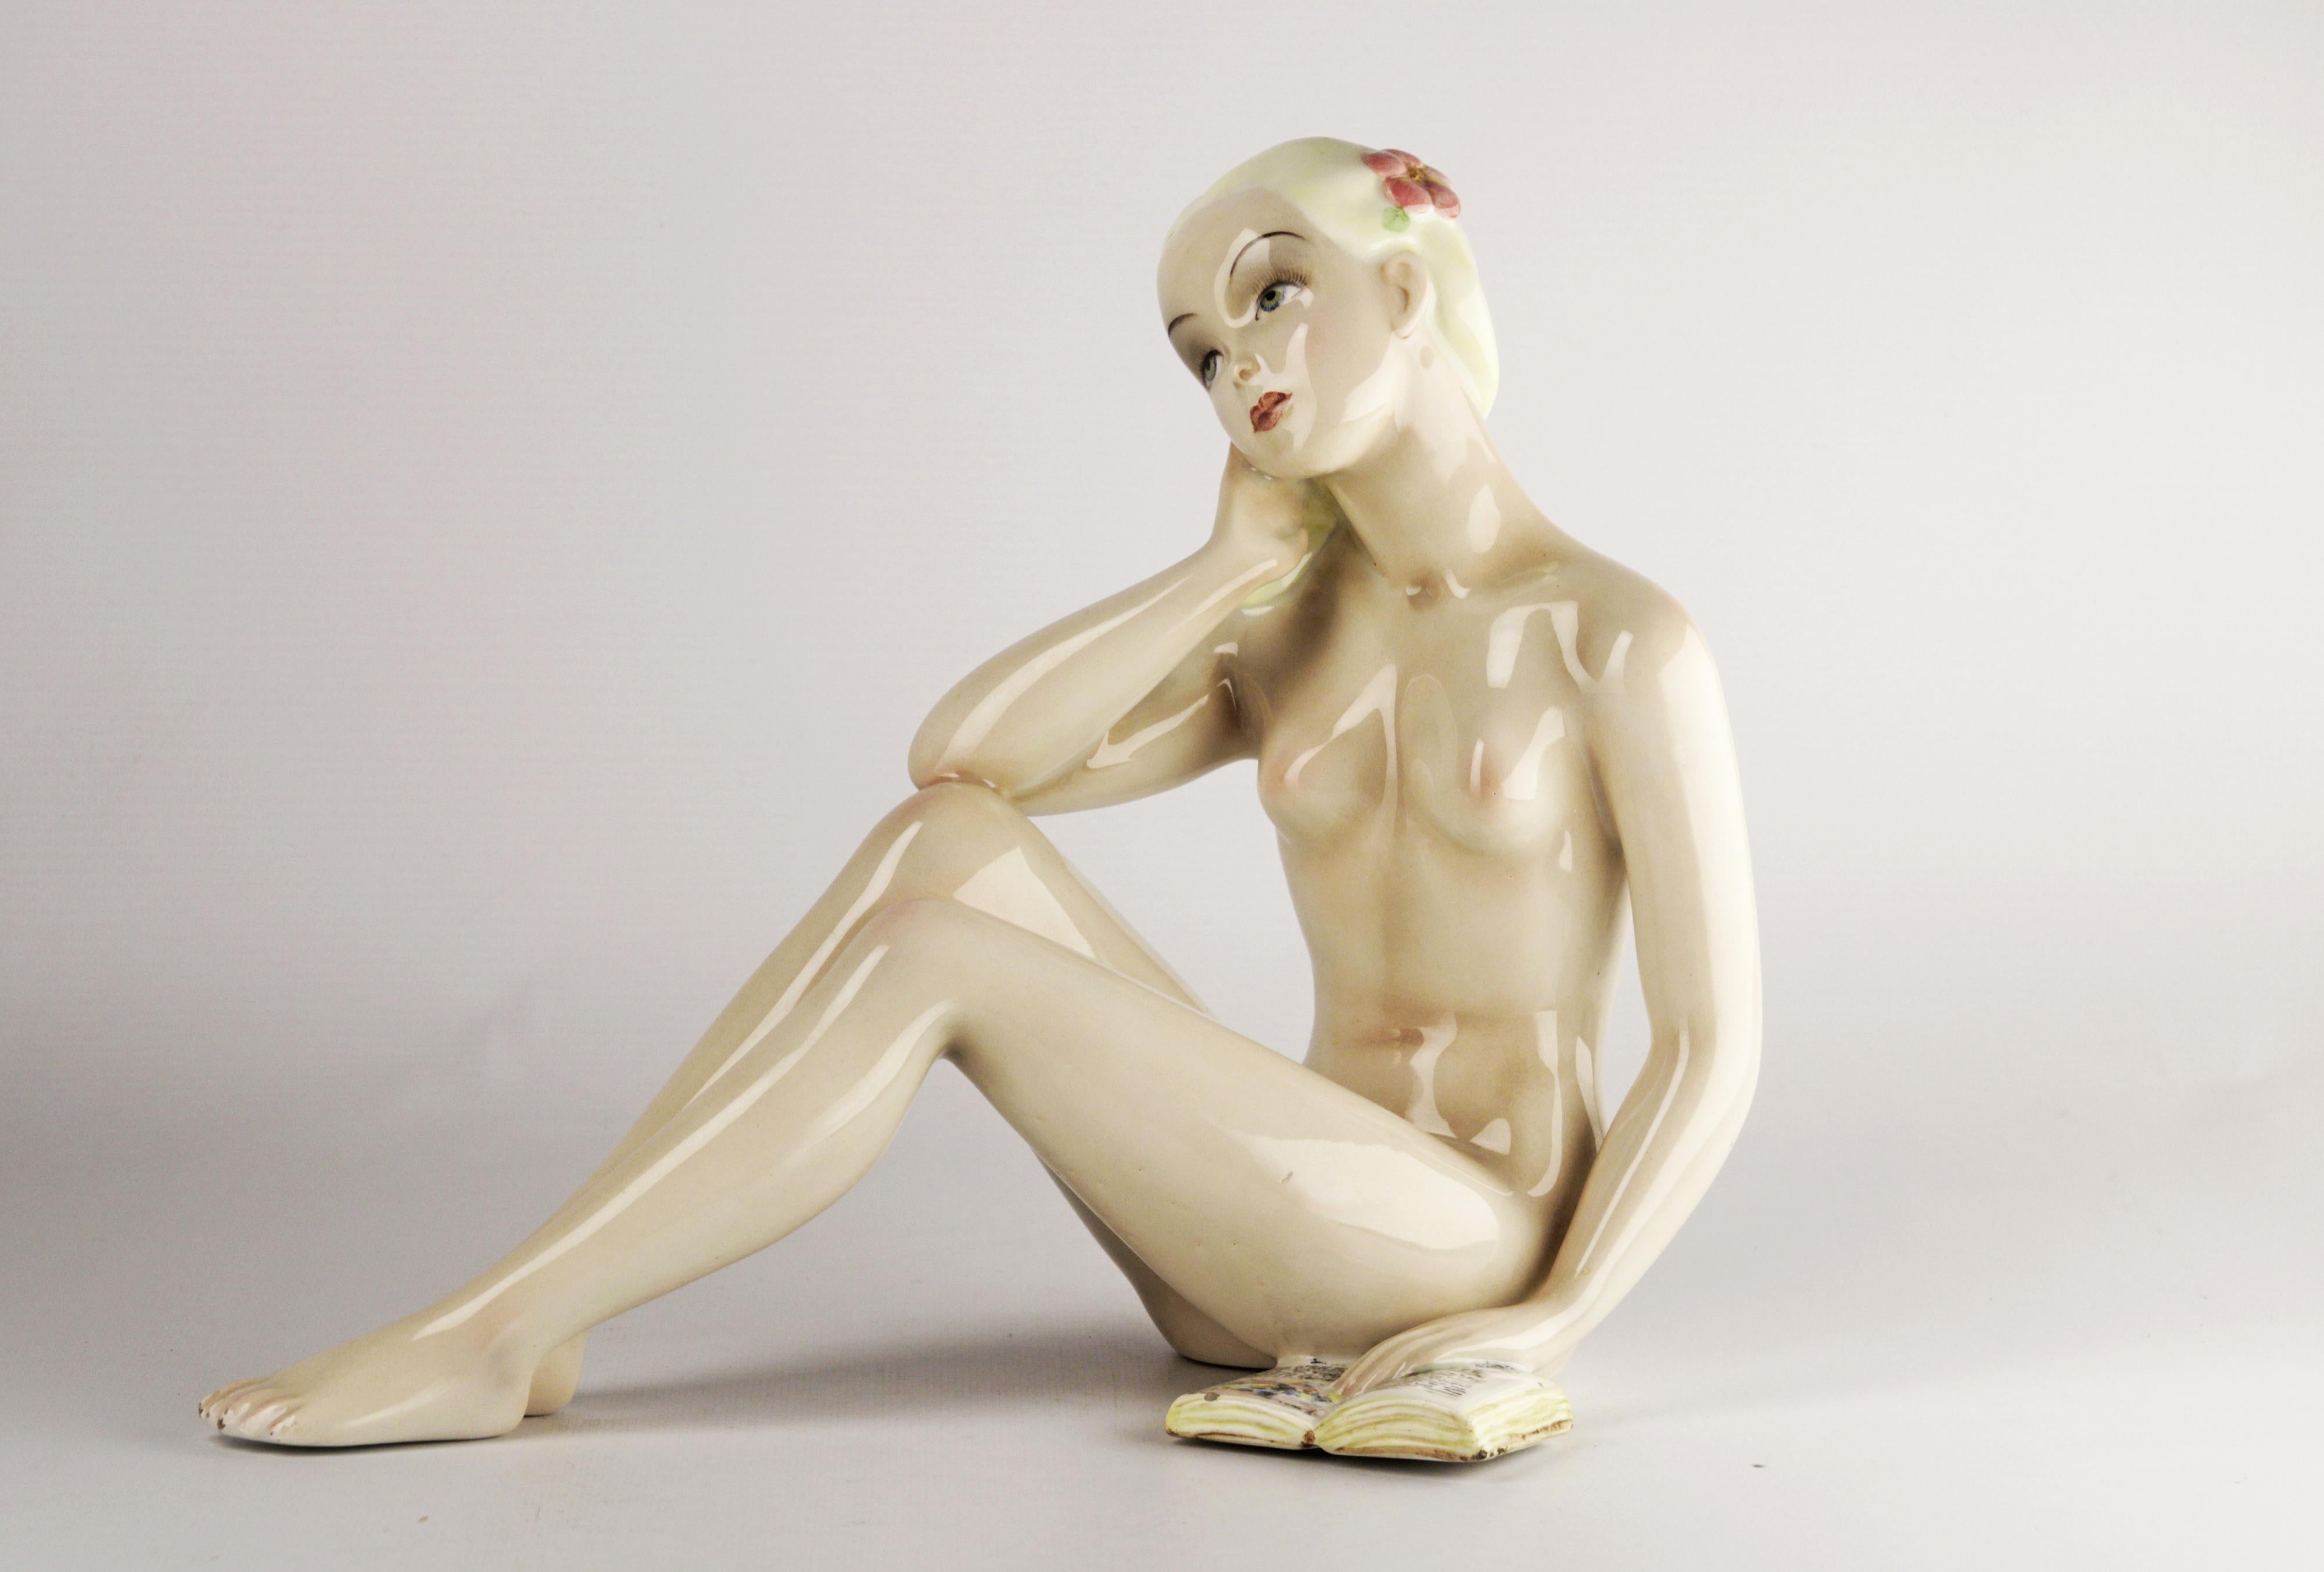 Mid-20th century glazed ceramic naked woman figure sculpture from Torino, Italy

By: unknown
Material: ceramic, paint
Technique: glazed, painted, pressed, molded, hand-painted
Dimensions: 4 in x 12 in x 9
Date: mid-20th century, post-war,